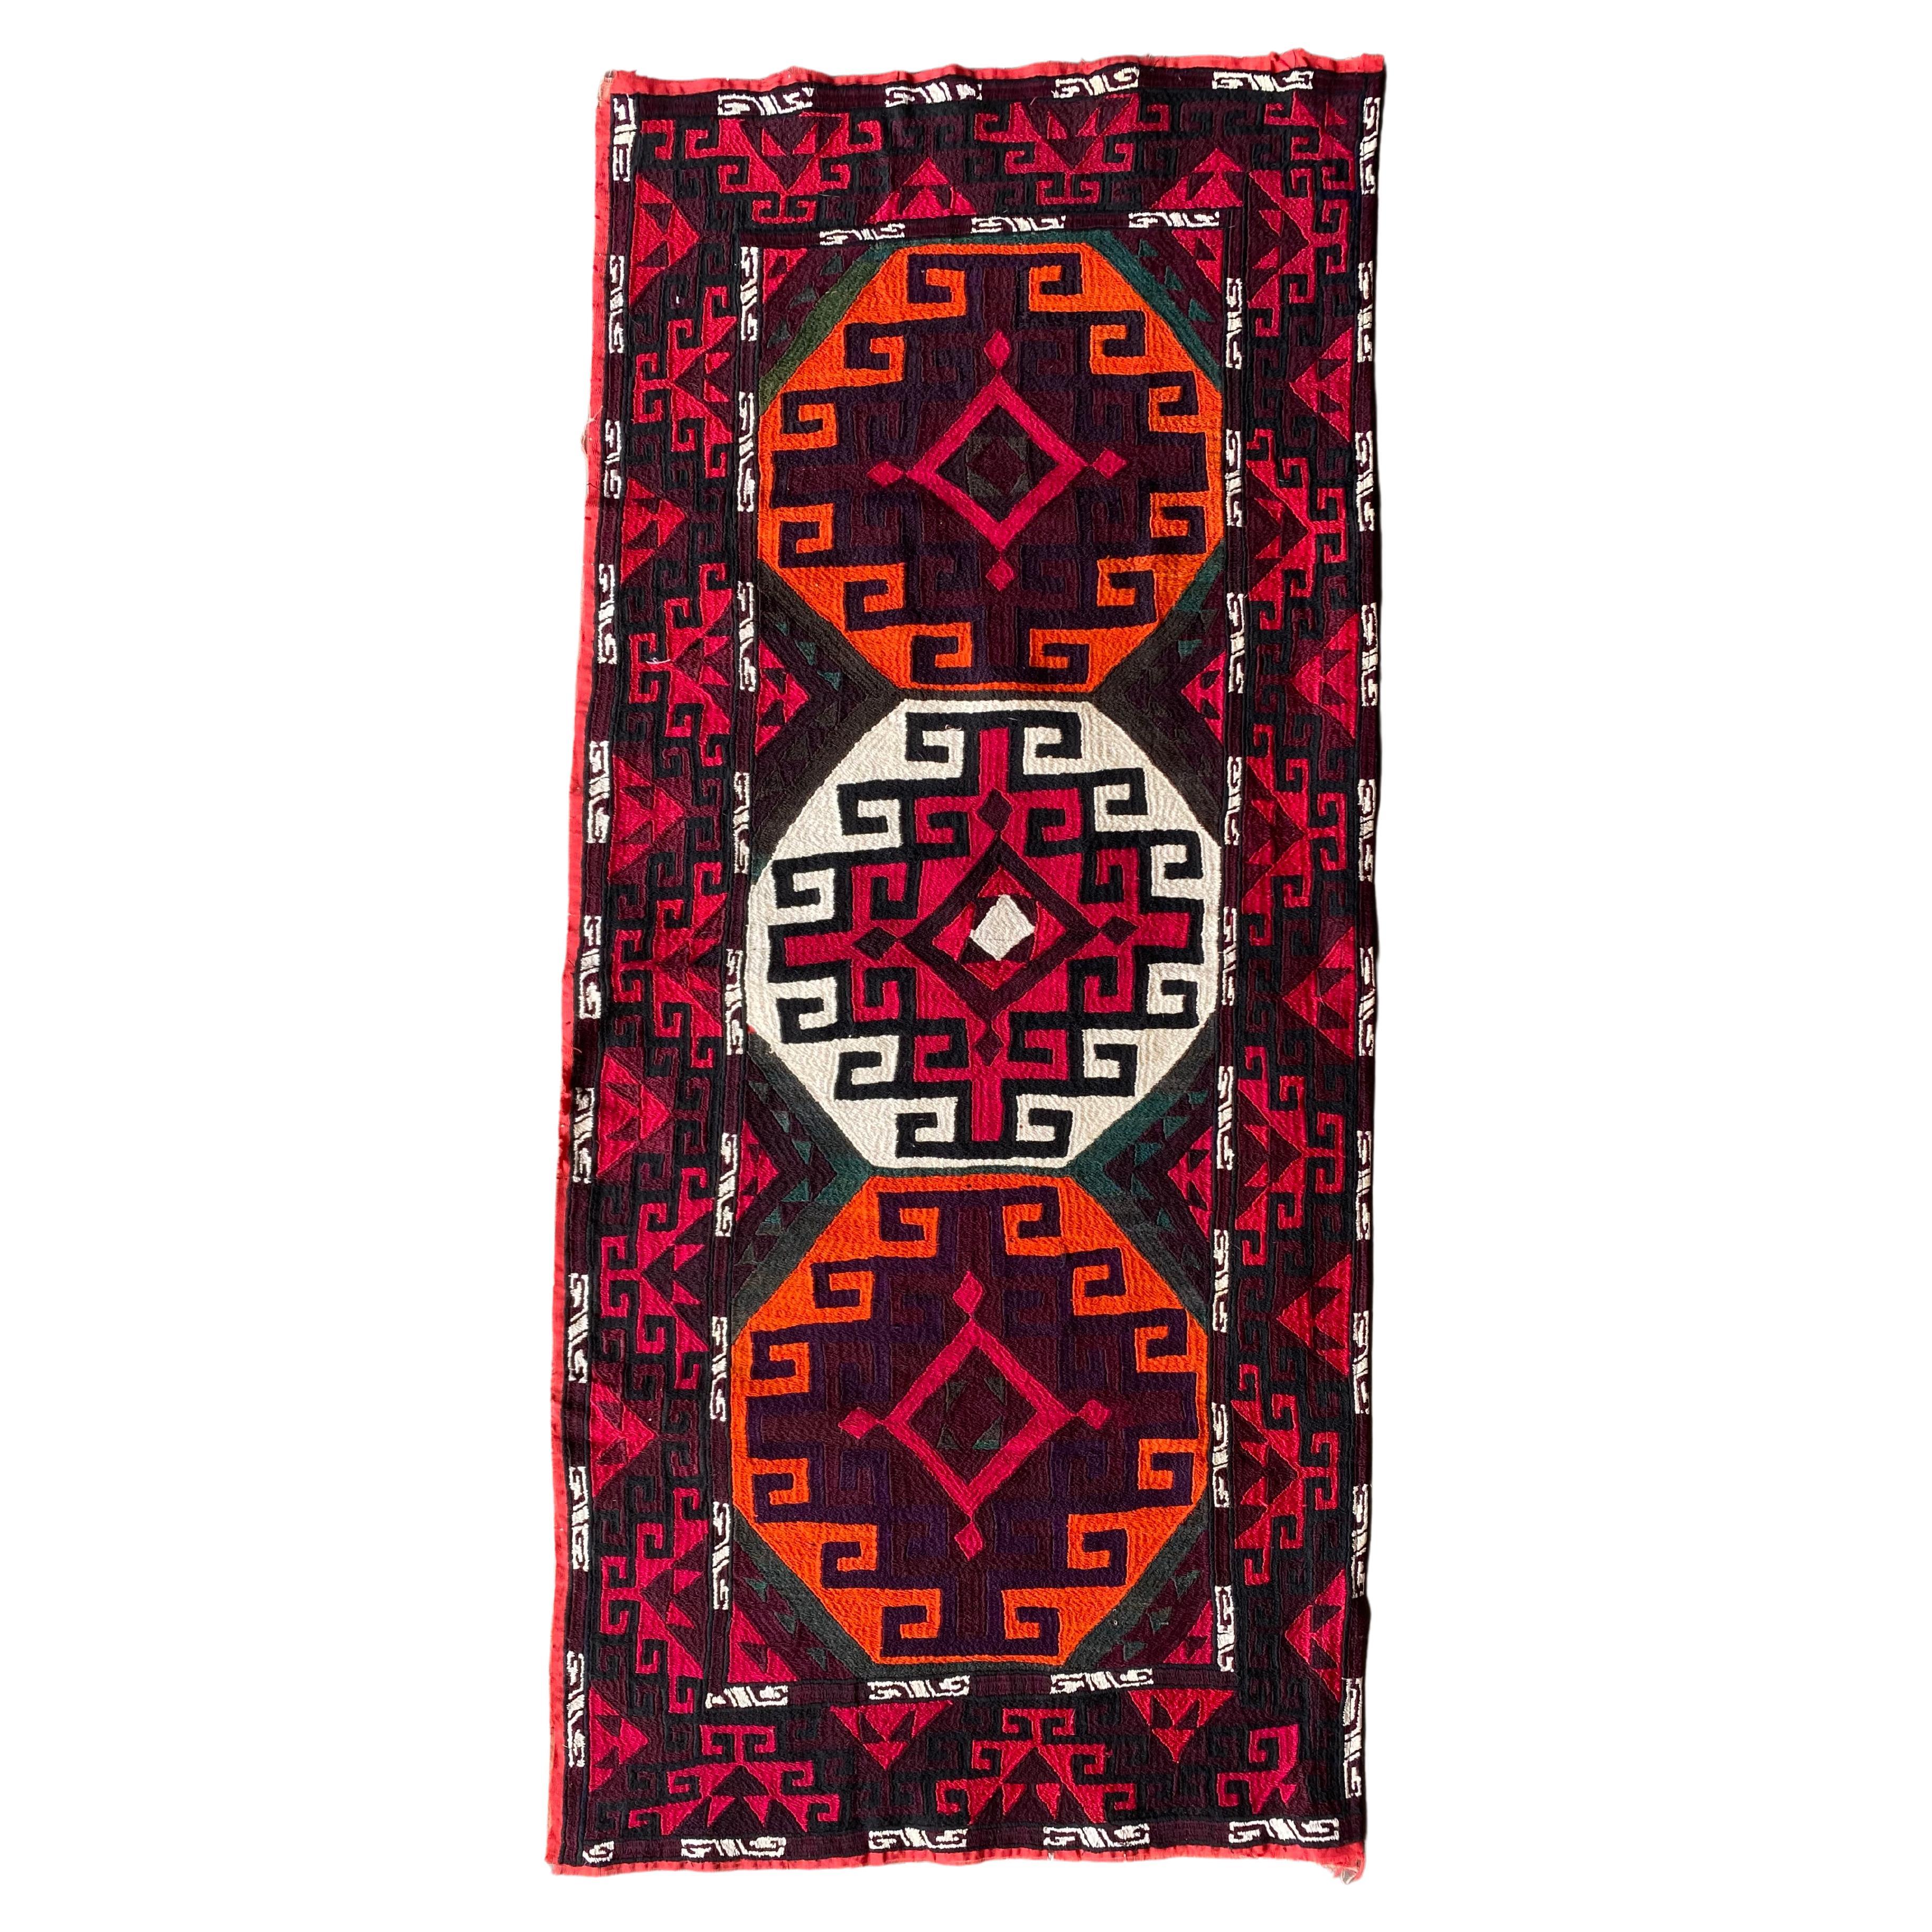 Central Asian Embroidered Textile, “Suzani”, Mid 20th Century 